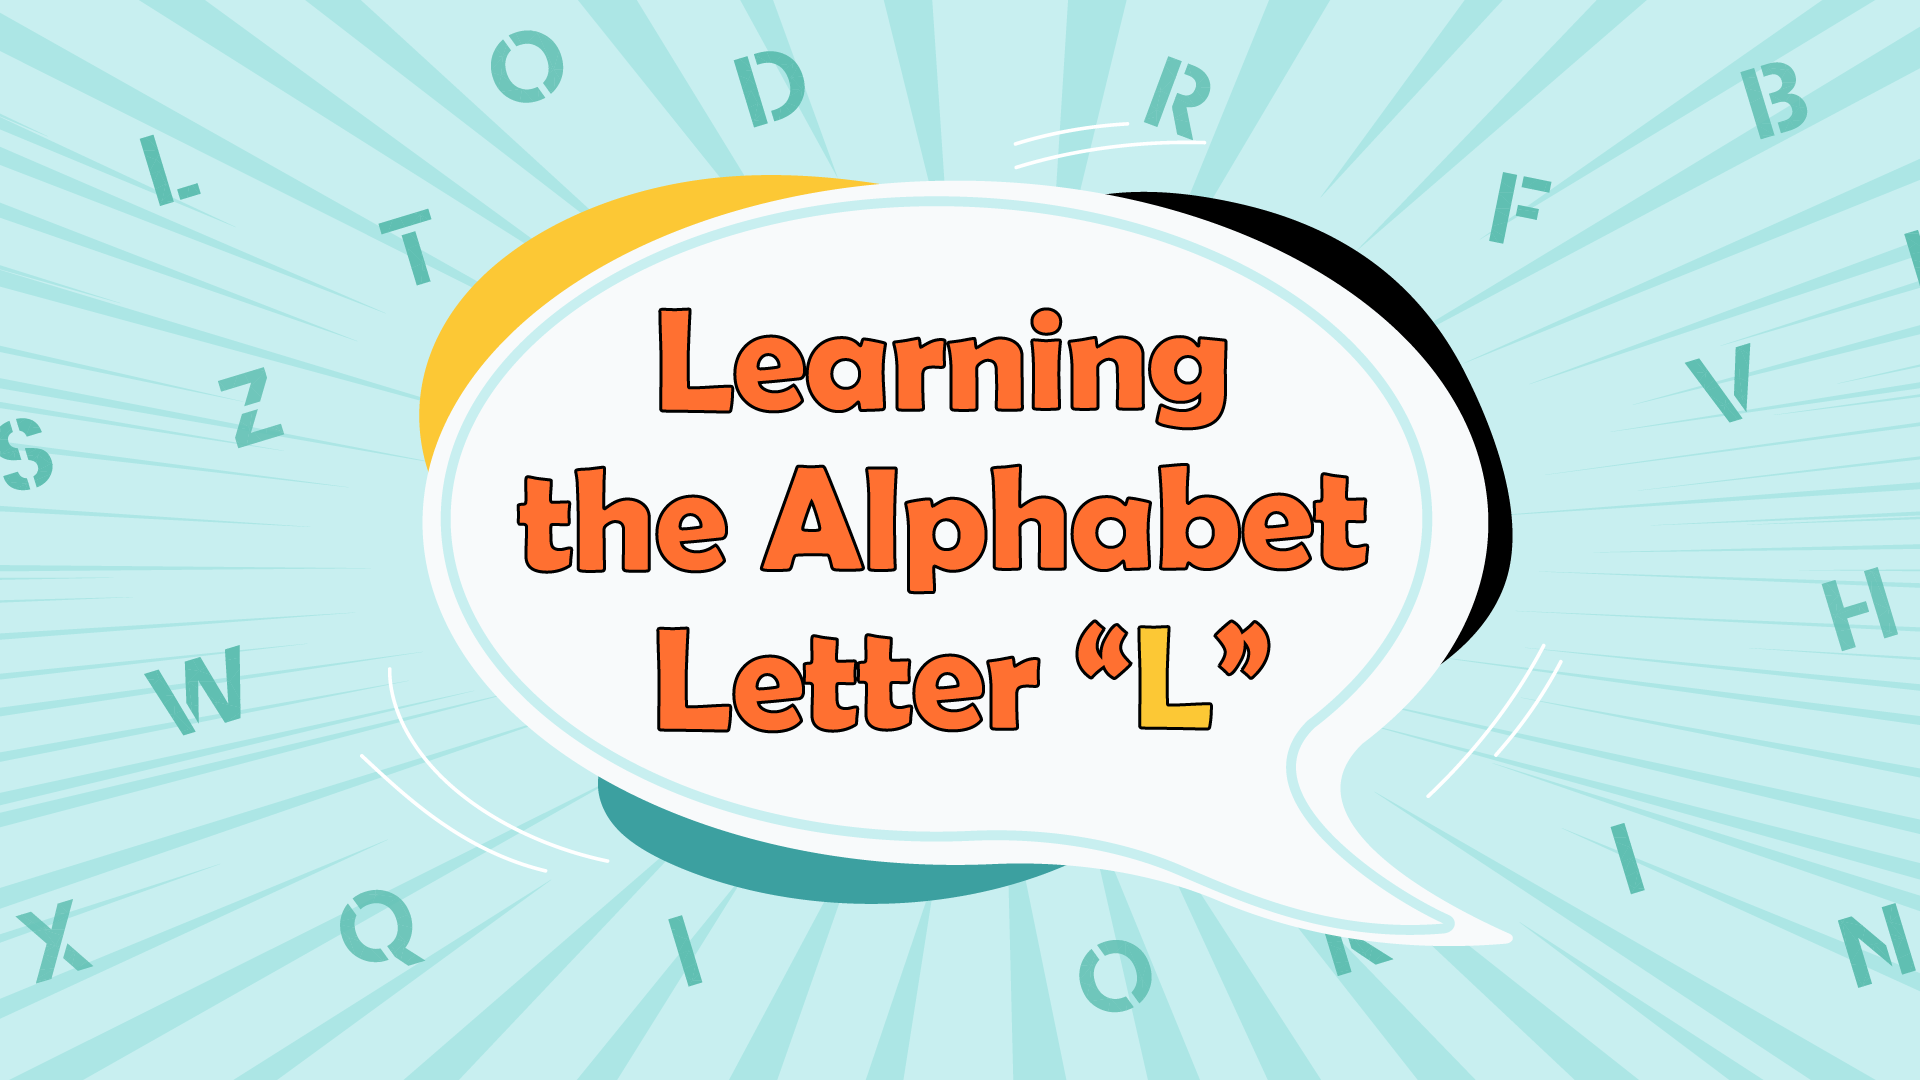 Learning the Alphabet: The letter ‘L’